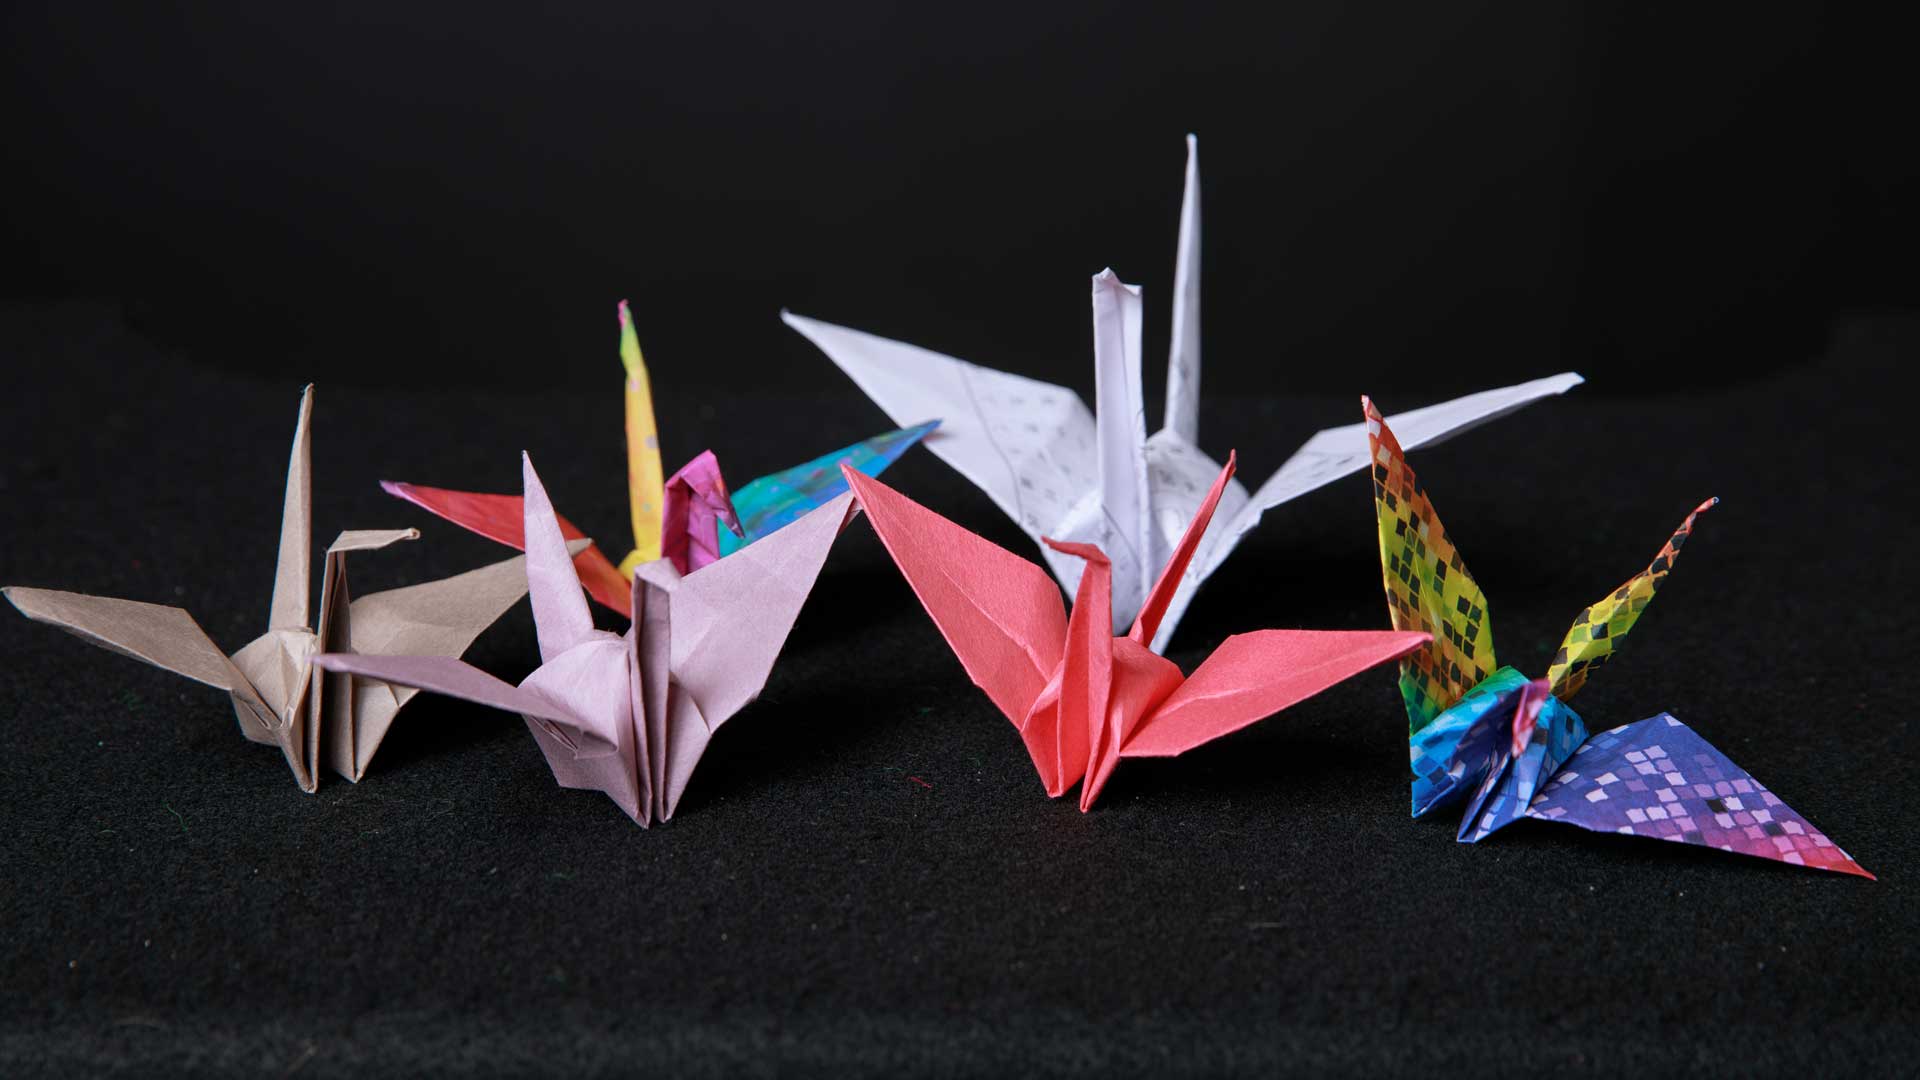 More than Folding Paper': a Look at Origami - University of